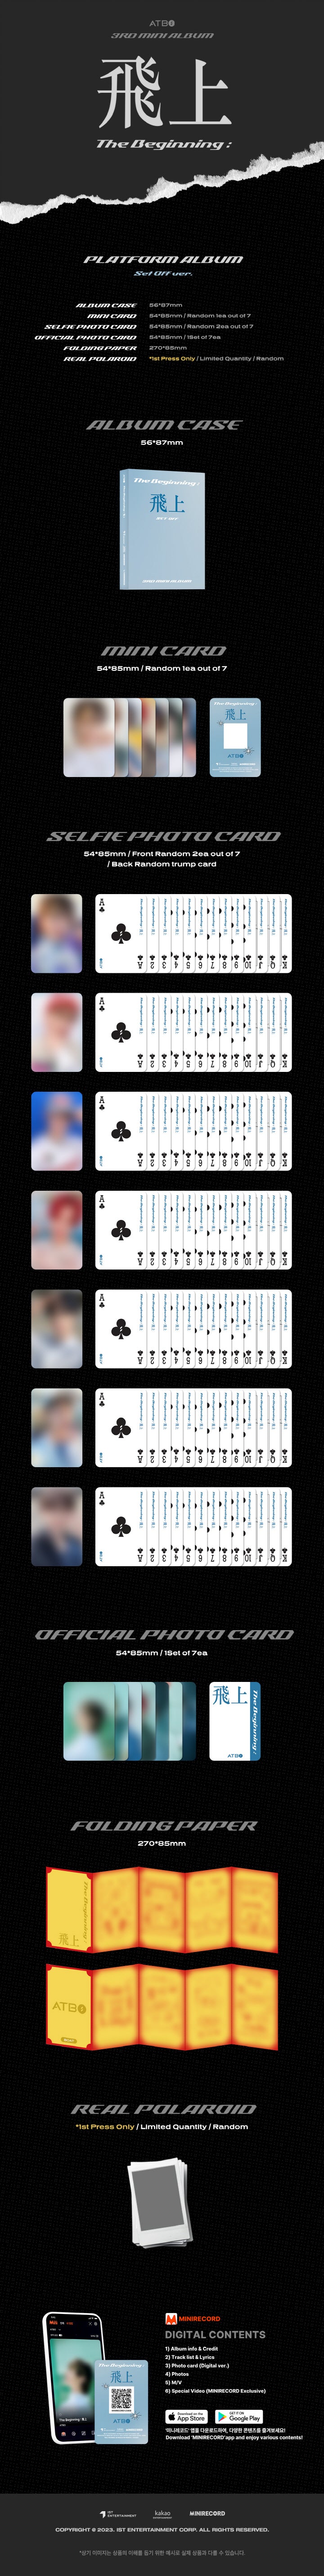 1 Mini Card (random out of 7 types)
2 Selfie Photo Cards (random out of 7 types)
7 Official Photo Cards
1 Folding Paper